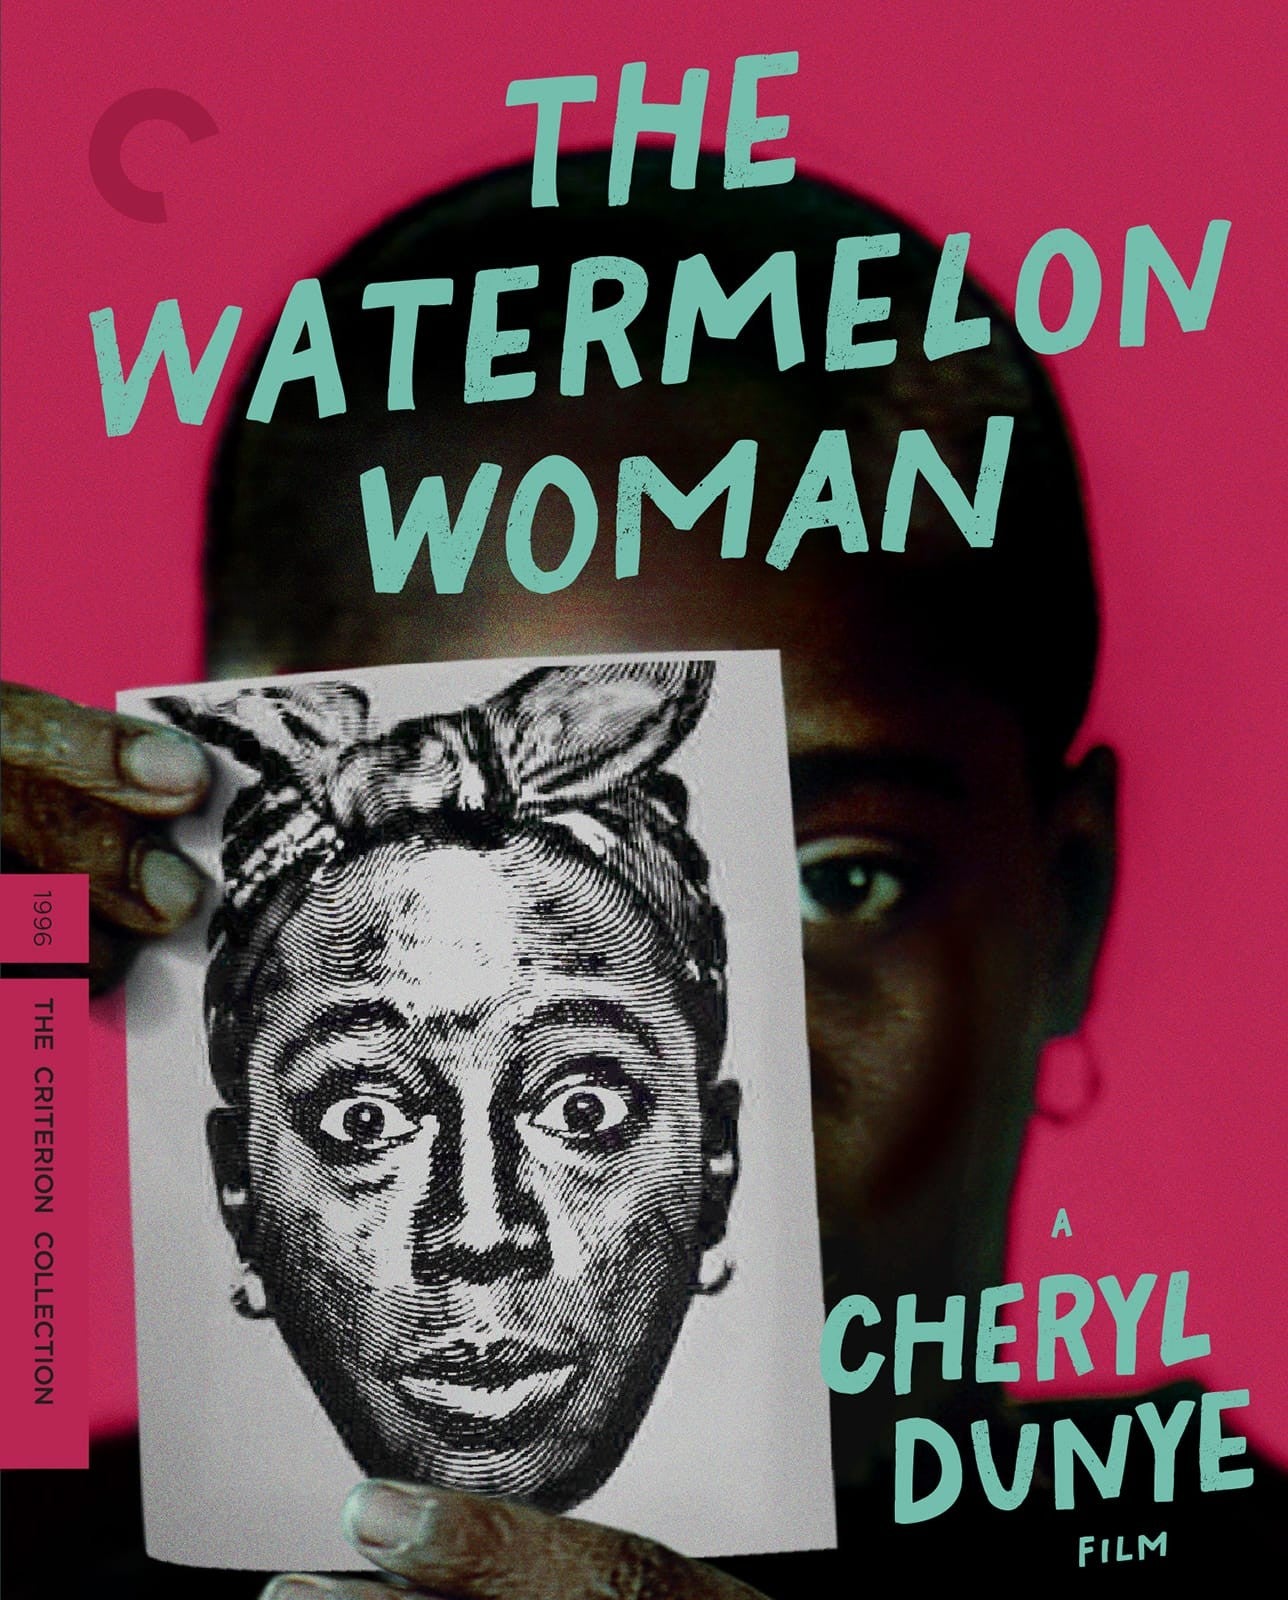 The Watermelon Woman (1996) Blu-ray (Criterion Collection)